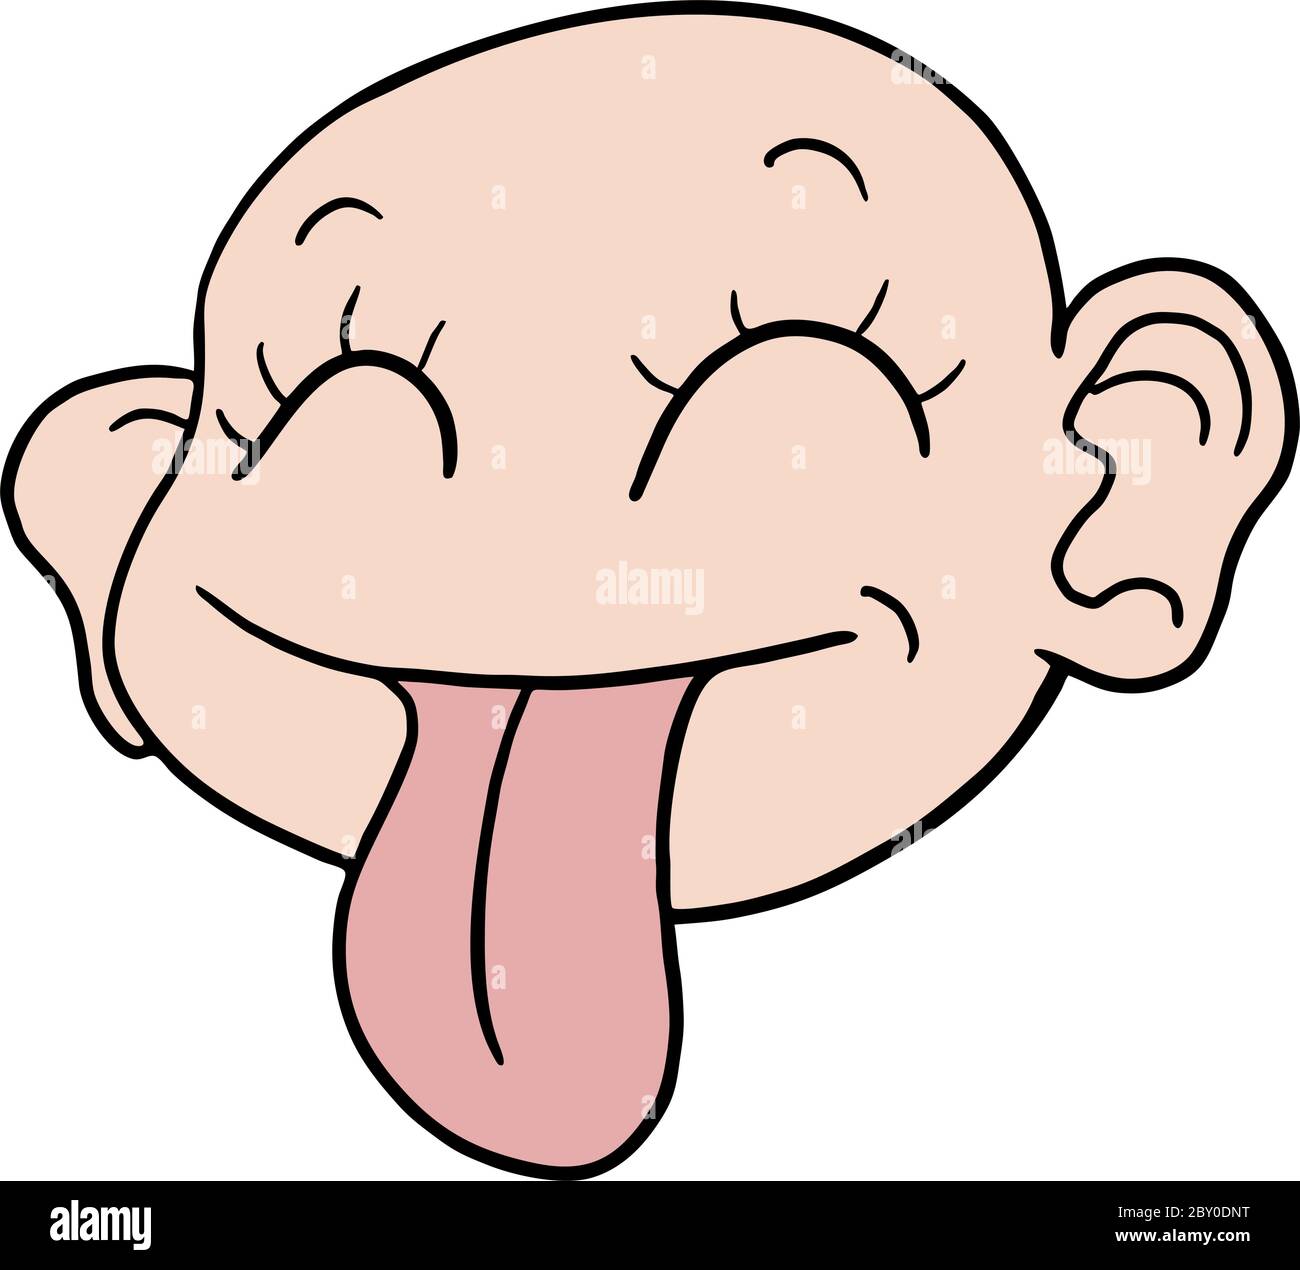 funny baby face Stock Vector